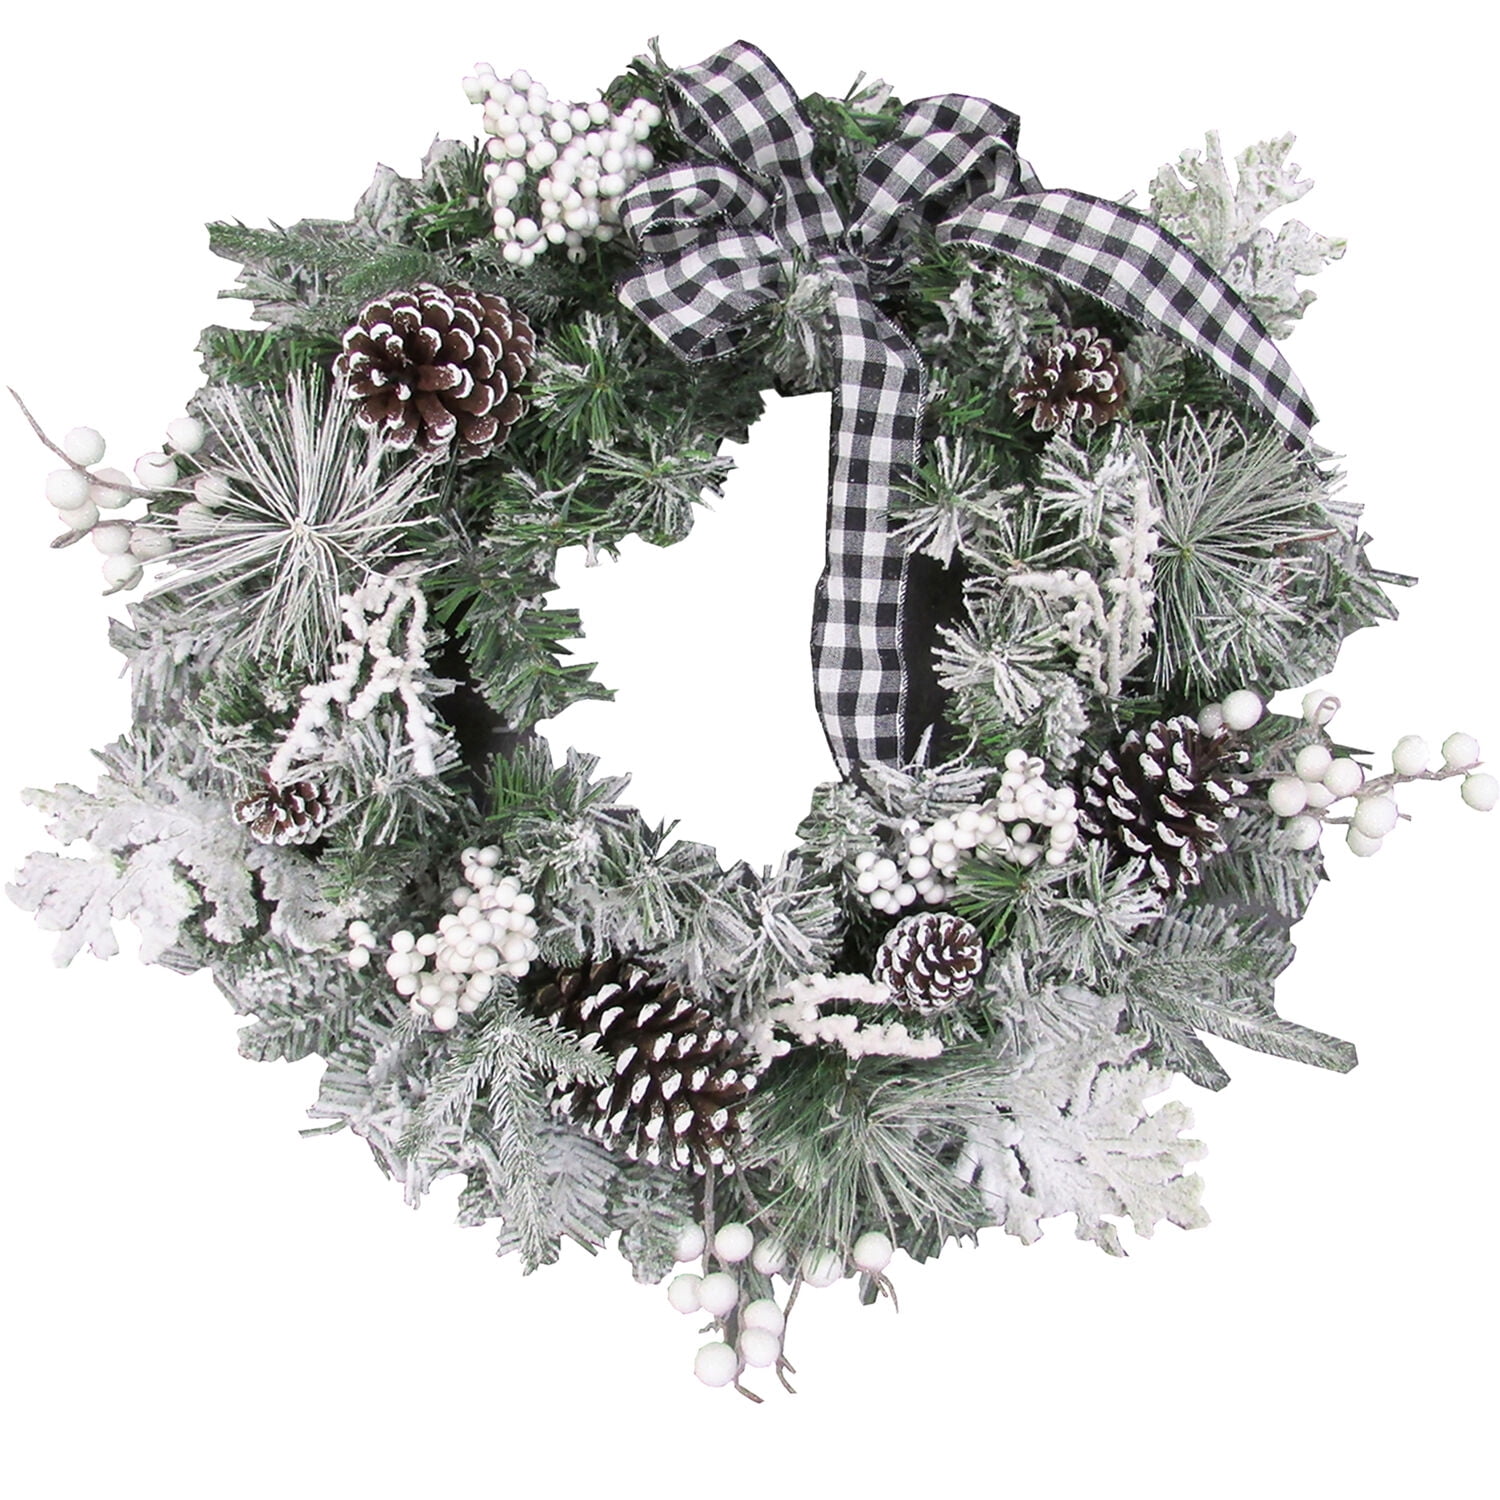 24-Inch Christmas Flocked Pine Wreath With Berries Ornaments Pine Cones Ribbon 